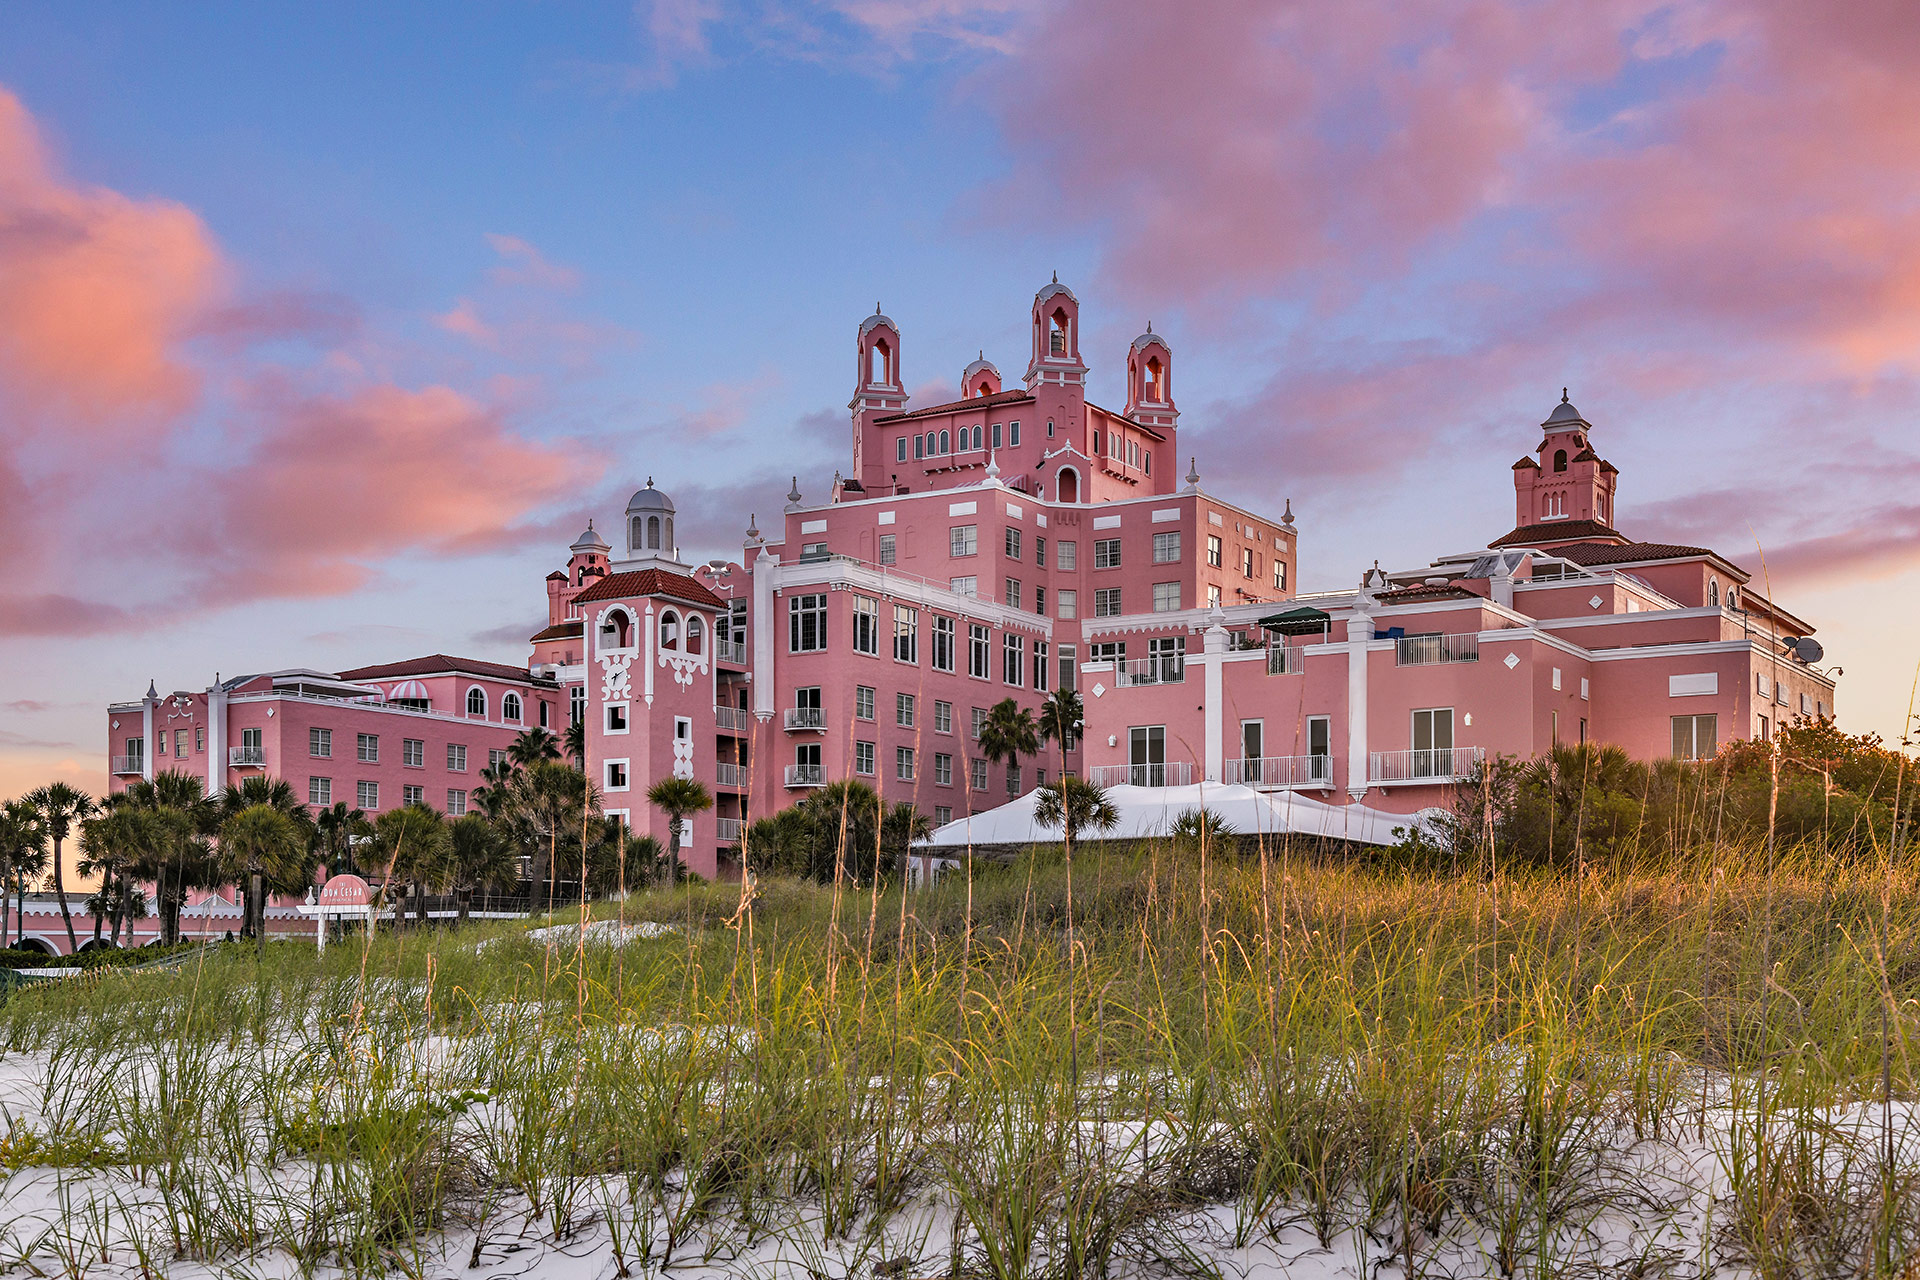 Architecture Transformed: How the Iconic Don CeSar Hotel Was Made  Accessible for All